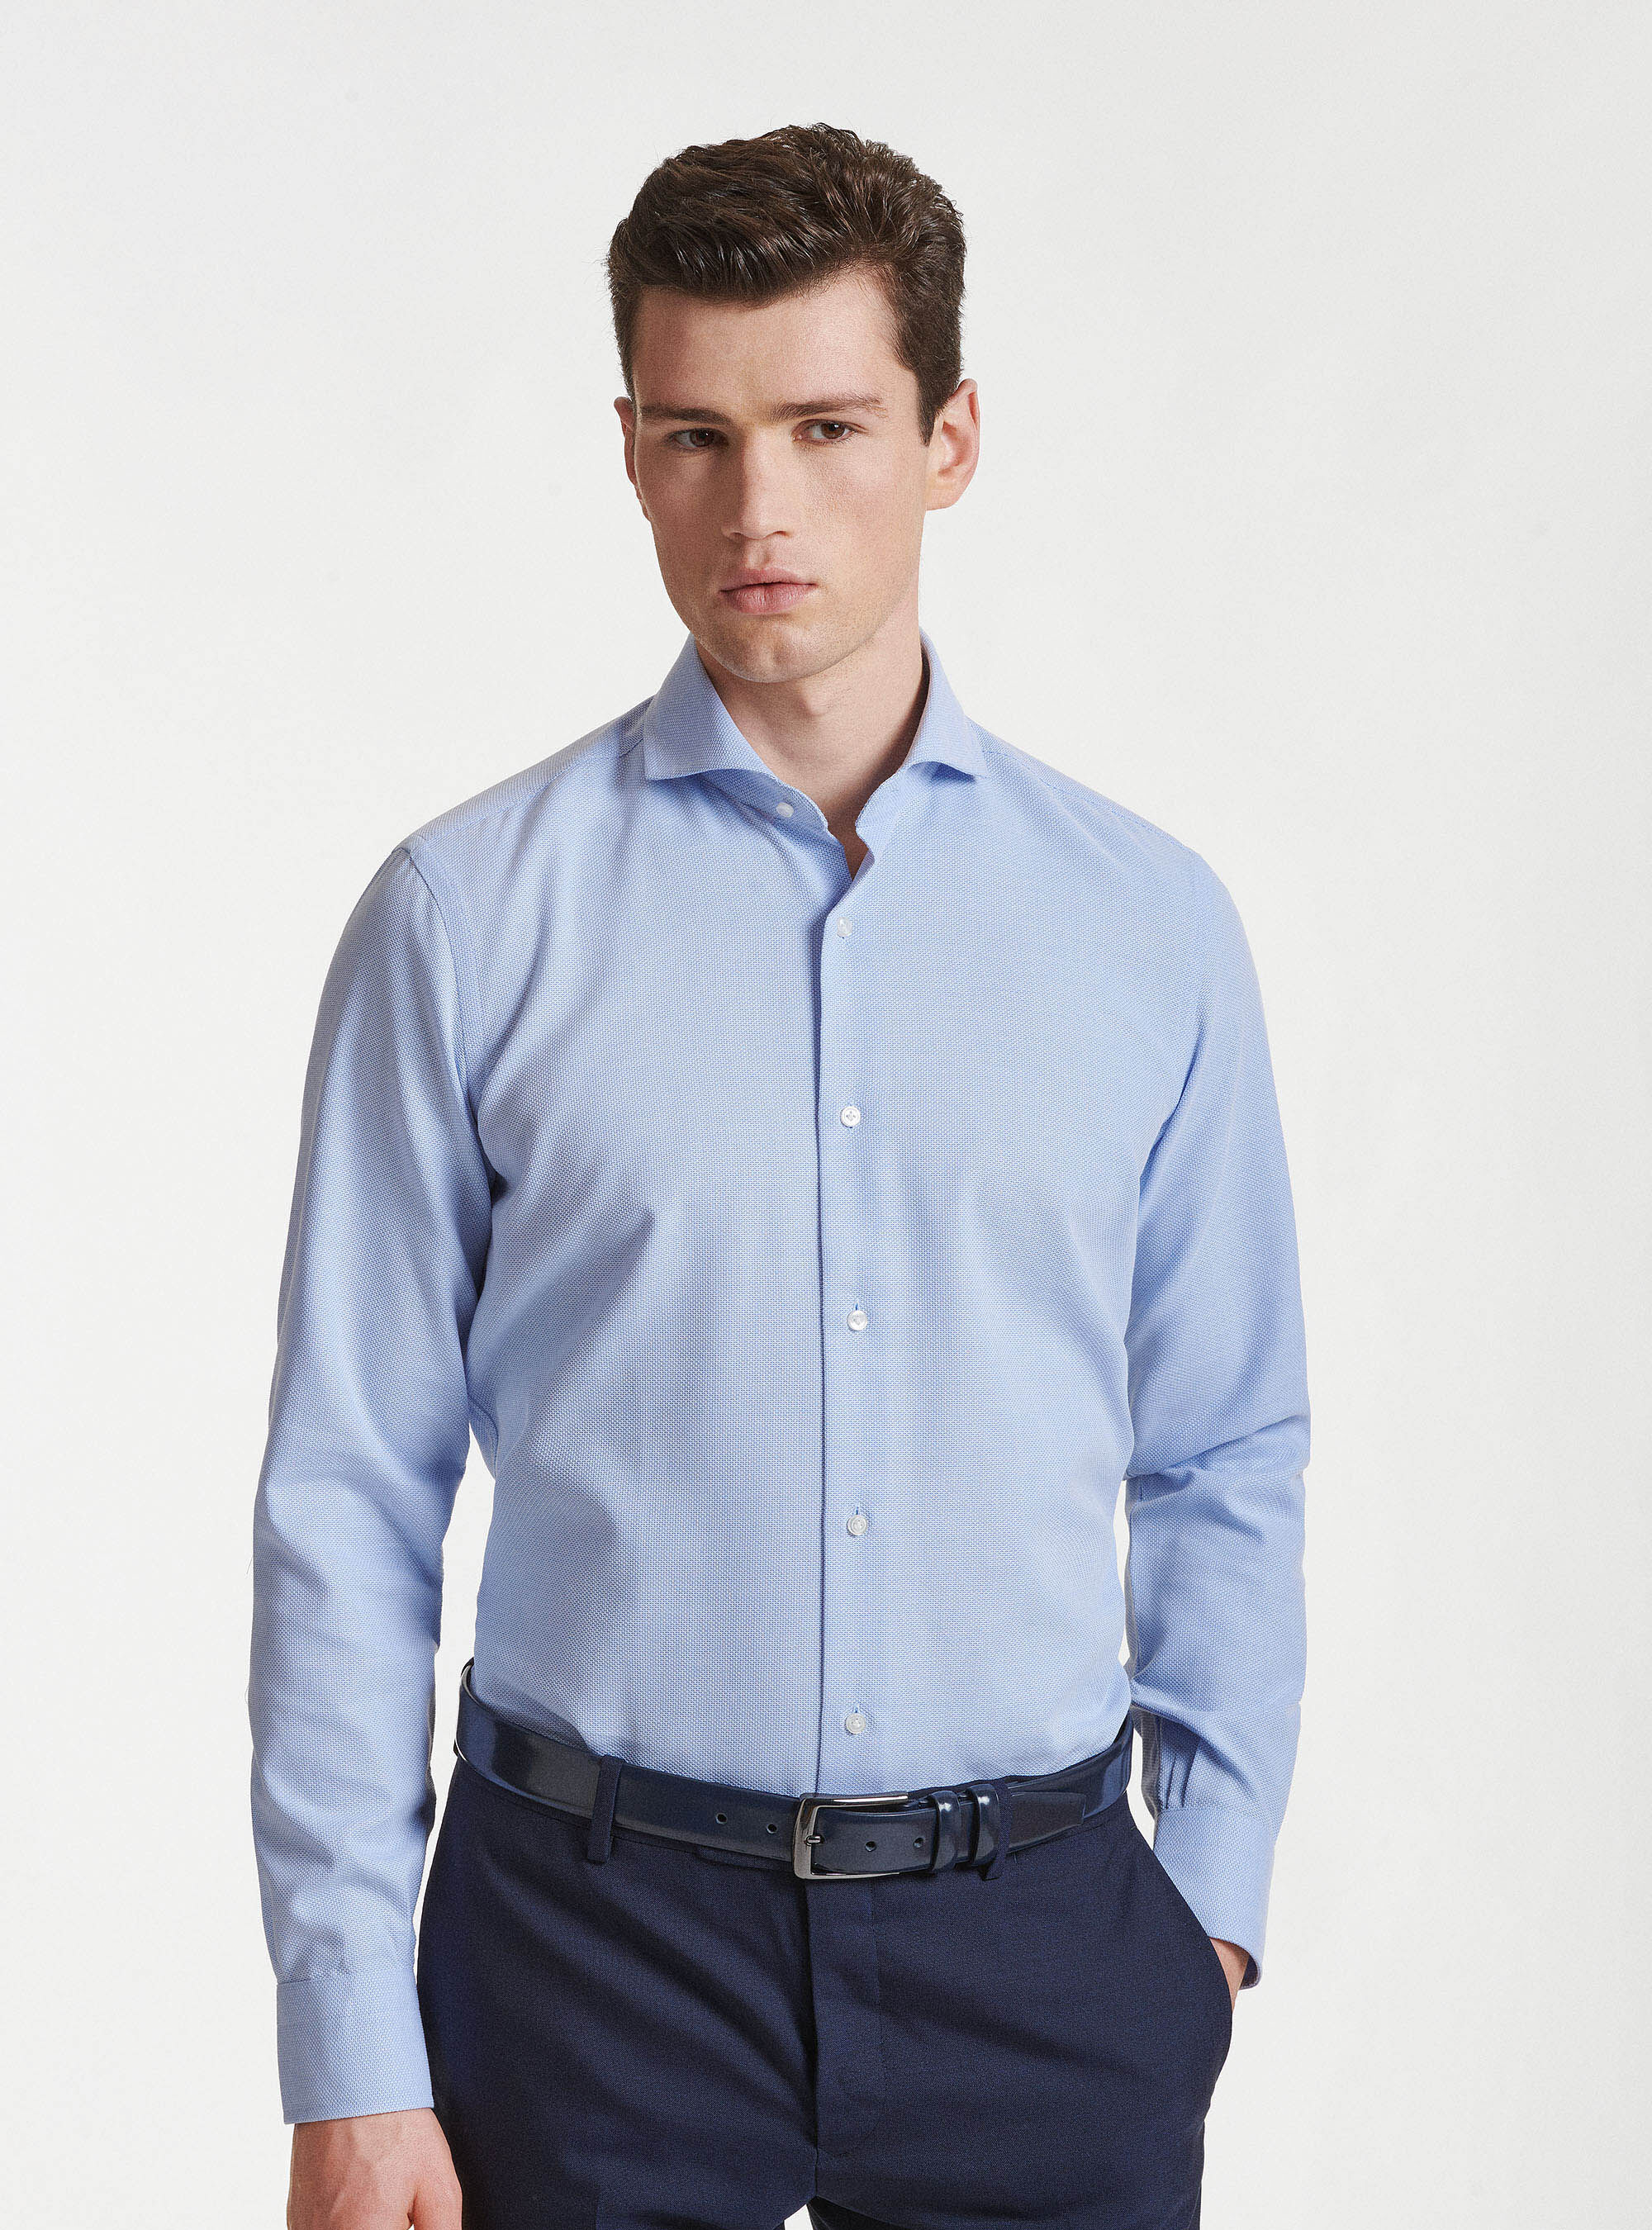 French collar shirt in textured cotton